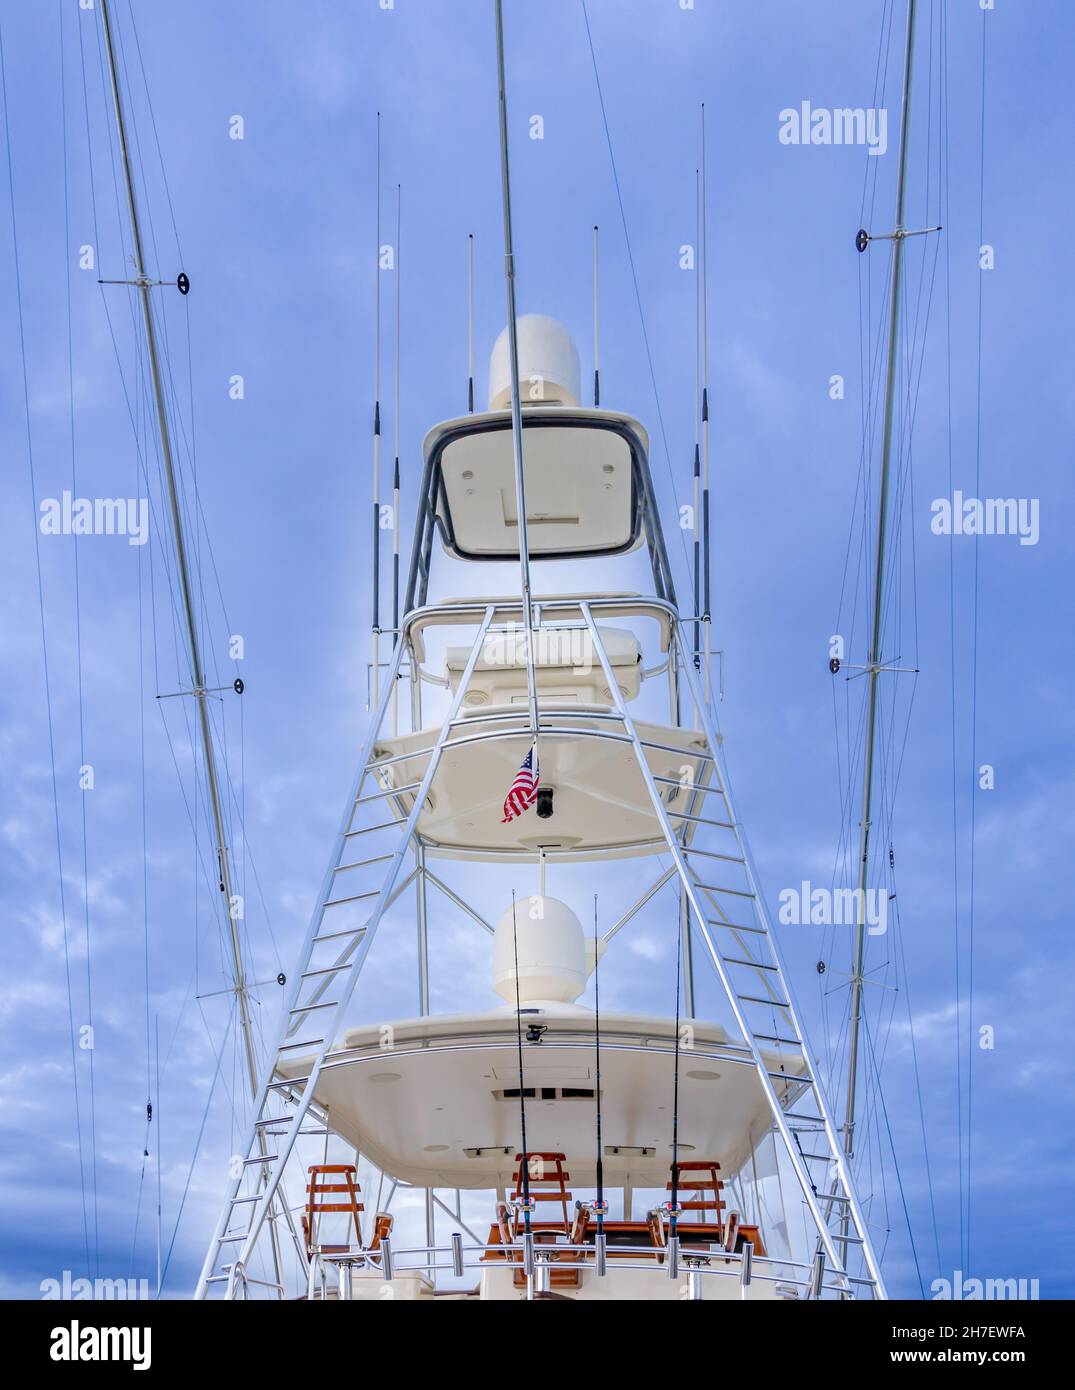 Top portion of a fishing boat Stock Photo